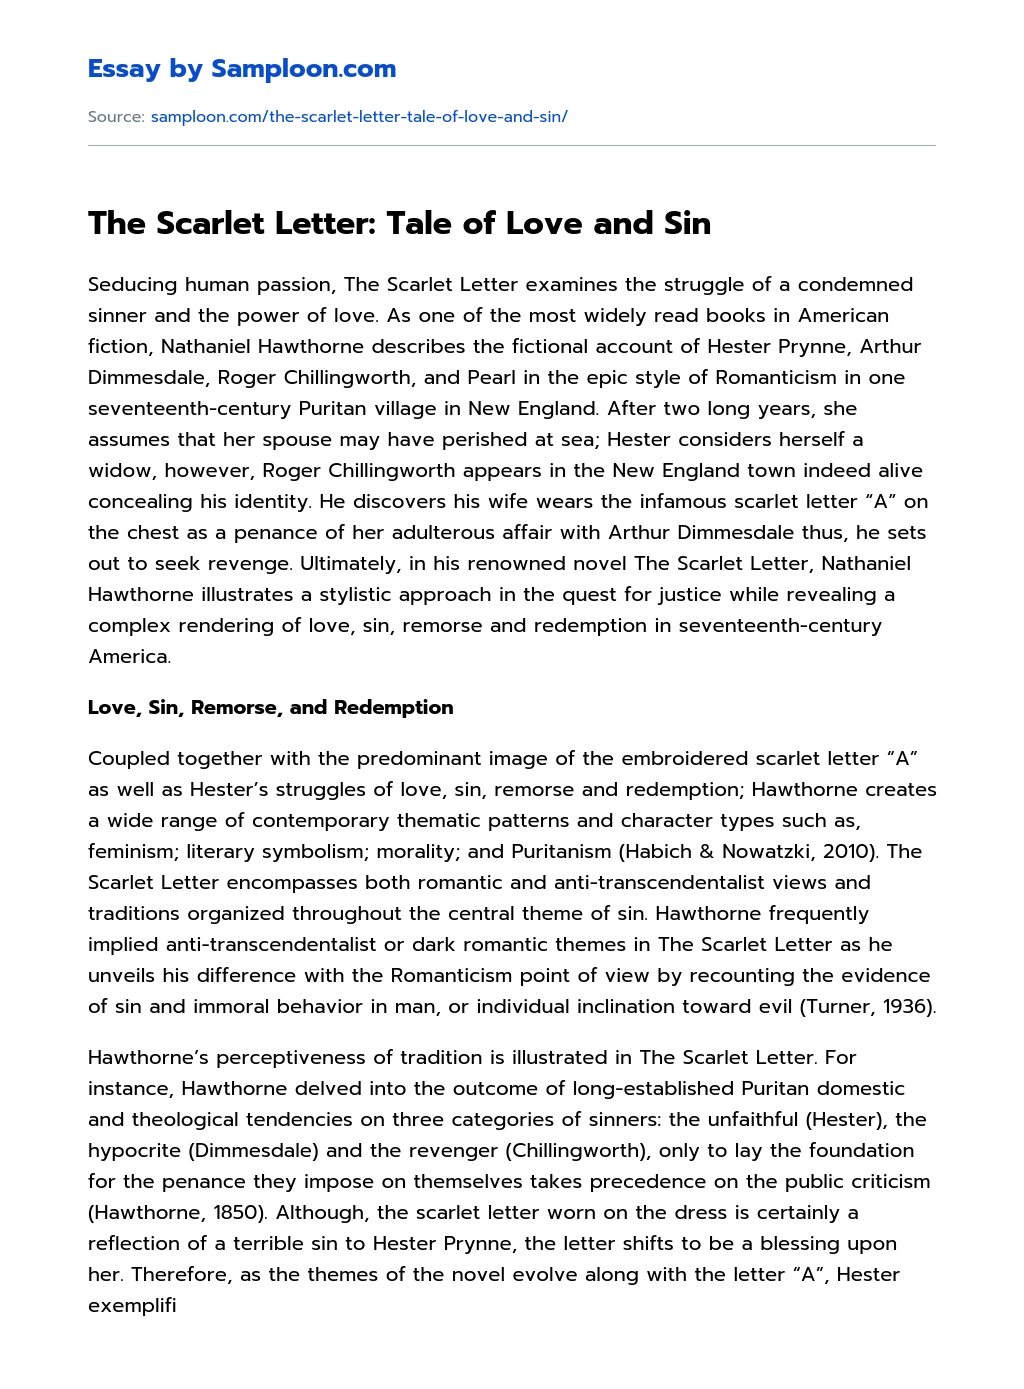 The Scarlet Letter: Tale of Love and Sin essay